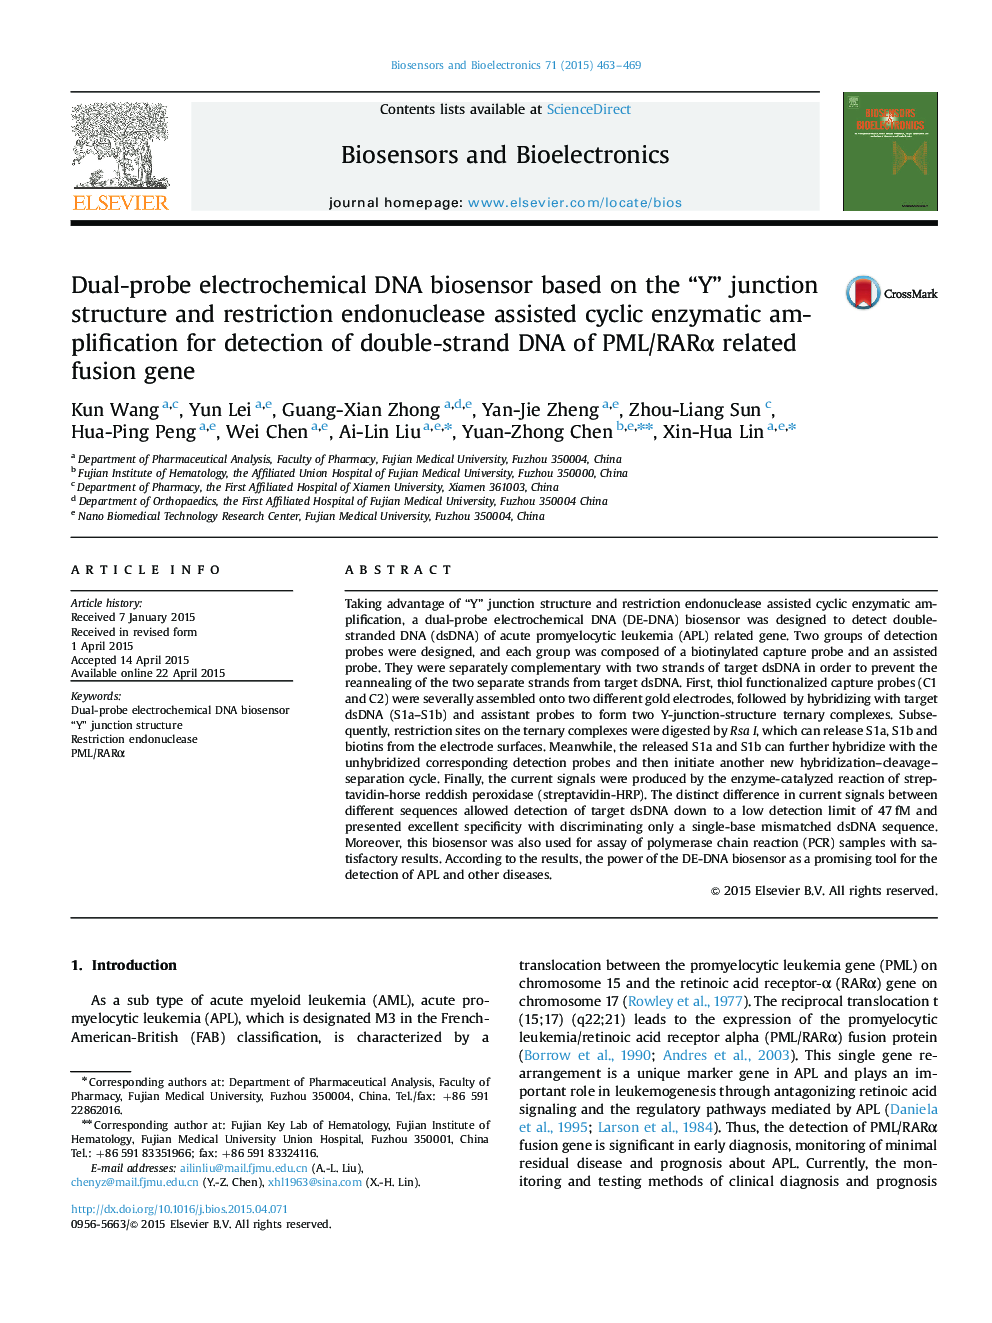 Dual-probe electrochemical DNA biosensor based on the “Y” junction structure and restriction endonuclease assisted cyclic enzymatic amplification for detection of double-strand DNA of PML/RARÎ± related fusion gene